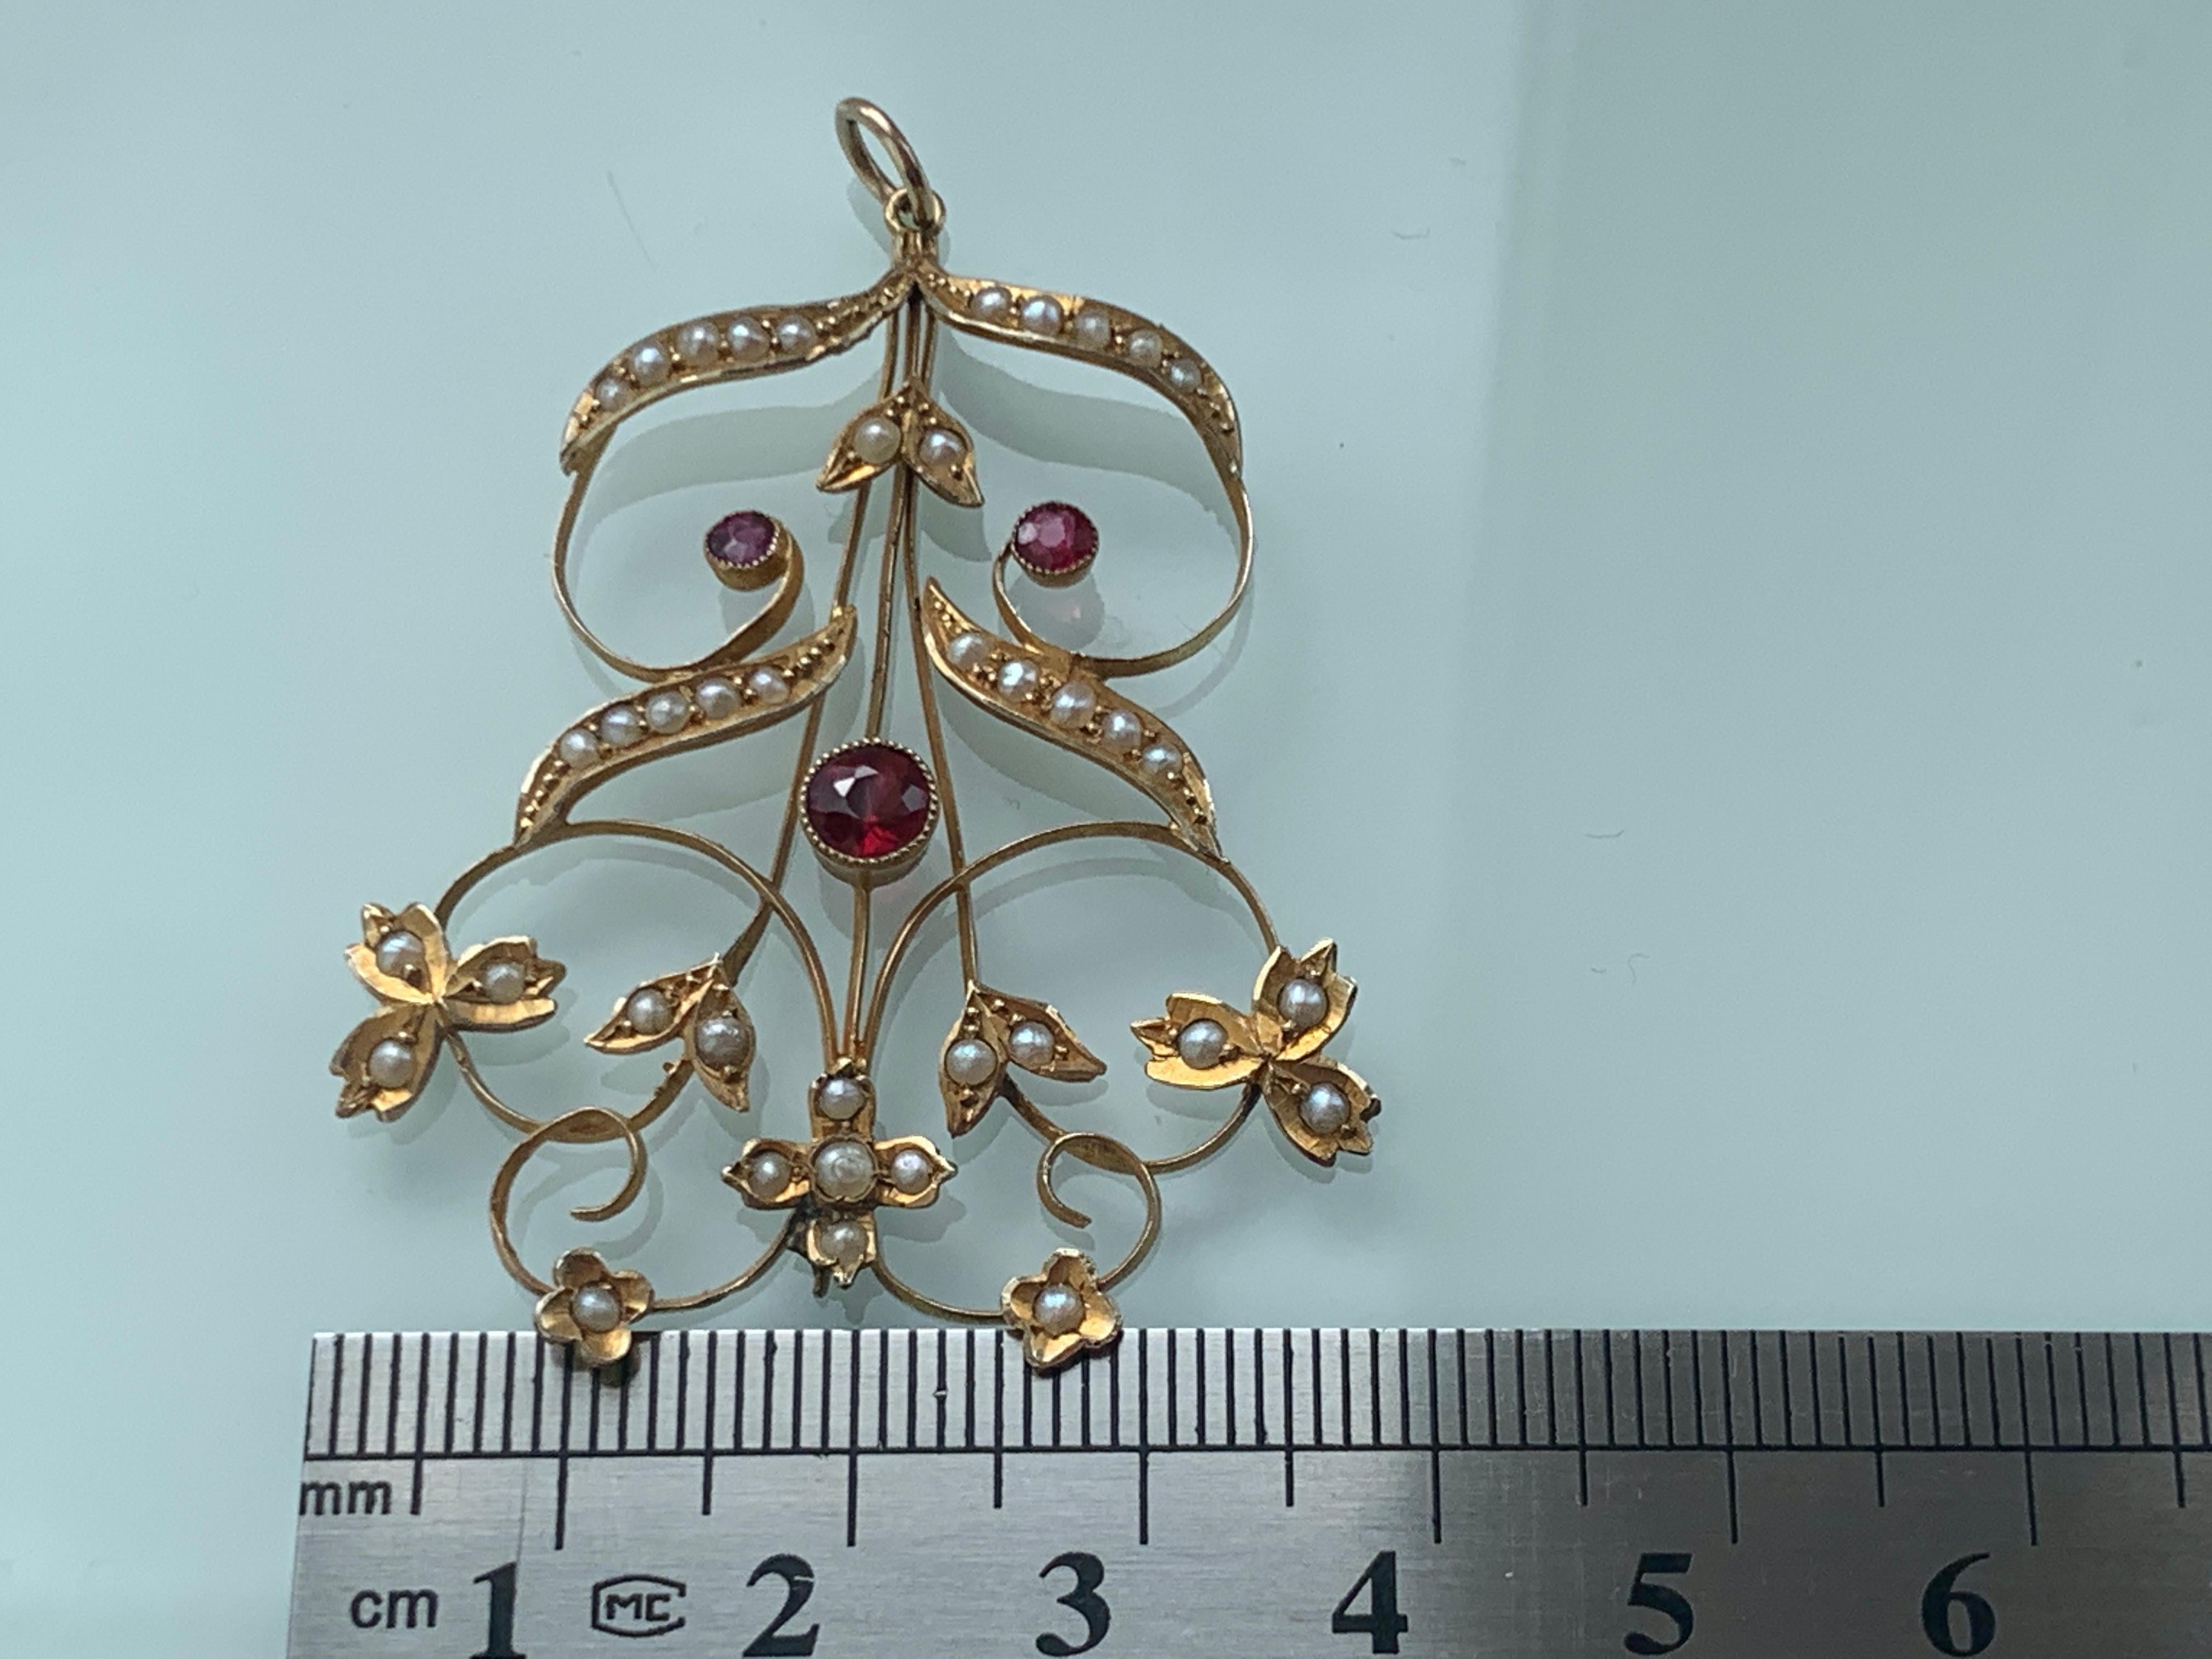 Edwardian Antique 9ct Gold Pendant Section
9ct 375 Gold Antique Pendant- in need of slight restoration

The final central drop or a further part to this design is missing
and there also is one broken leaf  join  - 
Sold as a part section of a